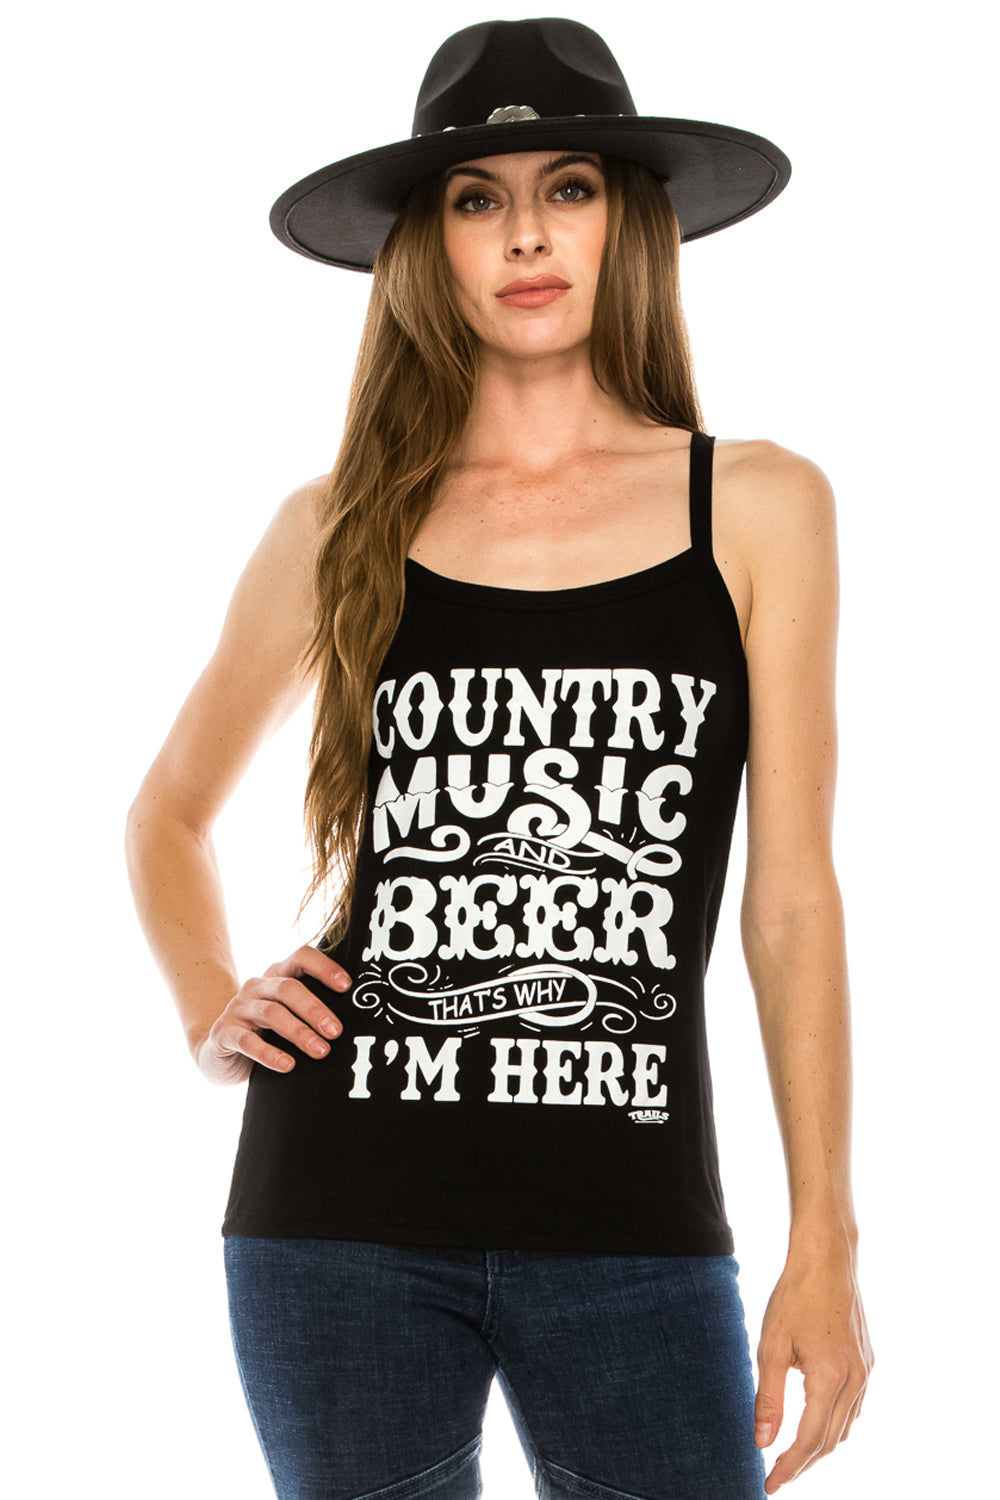 COUNTRY MUSIC AND BEER TANK TOP - Trailsclothing.com